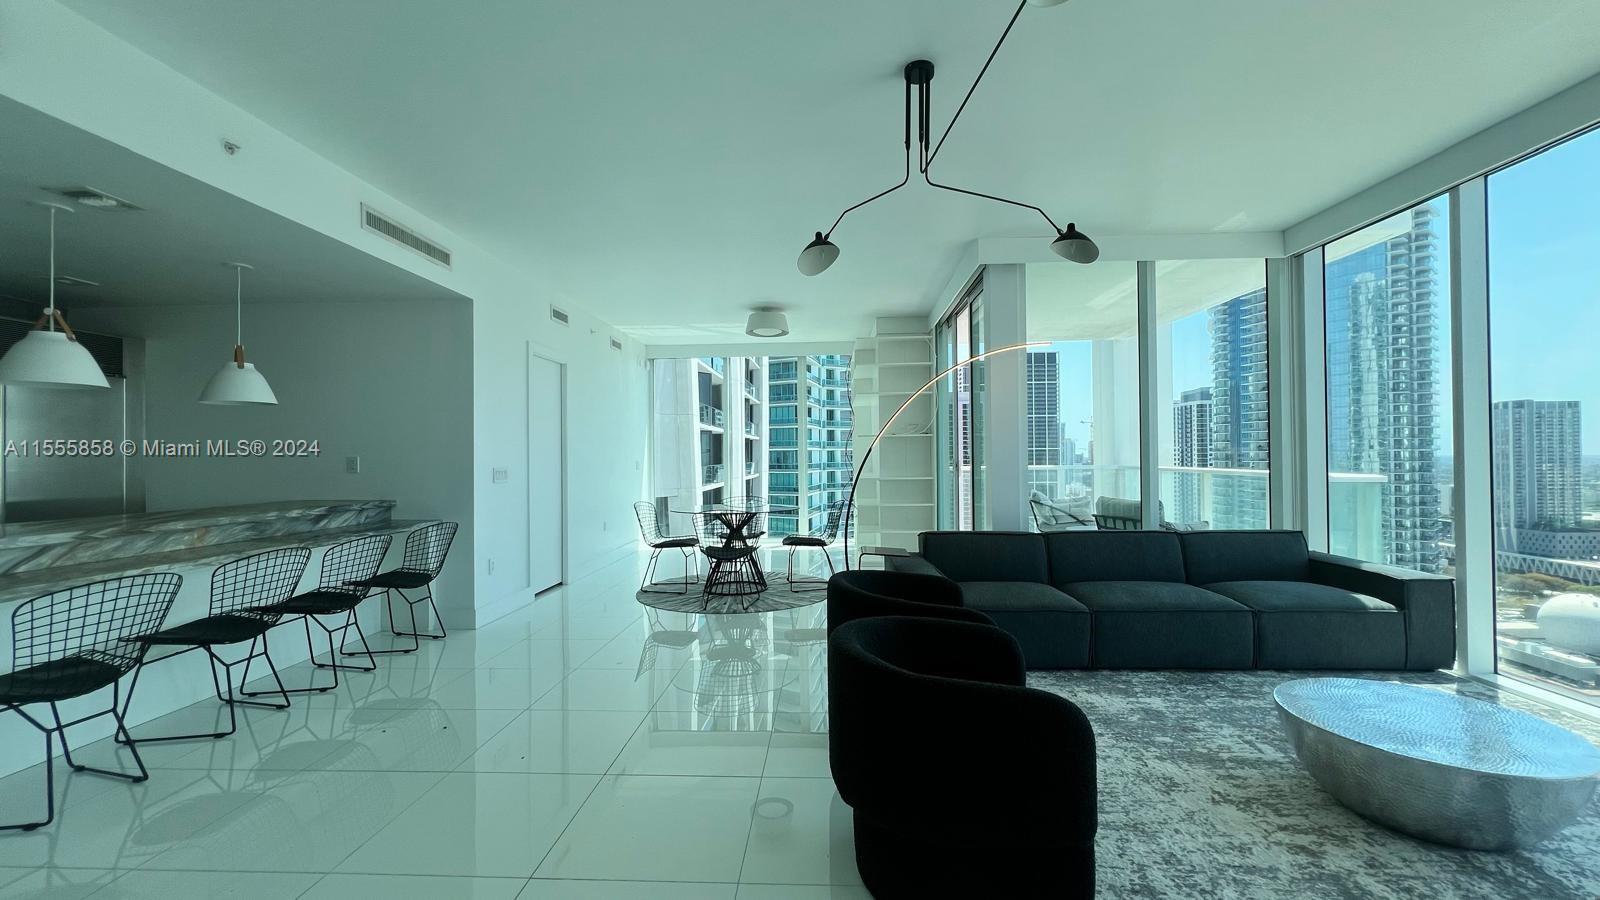 Amazing loft-style large 1 bedroom 2 full bathrooms apartment with a large open den in Ten Museum Park, one of the most desirable luxury buildings in Downtown Miami.  Open concept layout allows for spacious living, kitchen, dining, entertainment or office/guest areas with stunning views from floor to ceiling windows. Brand new furniture, updated with marble countertop kitchen island, updated bathrooms, custom closets, built out bar/pantry with a wine beverage fridge, marble floors throughout, full size washer and dryer , 2 parking spots.  Resort style amenities including multiple pools, state-of-the art fitness center, luxurious spa, Beach club service, full front desk concierge, 24hr security and valet. Centrally located to all Miami has to offer. Available to move in around October 1st